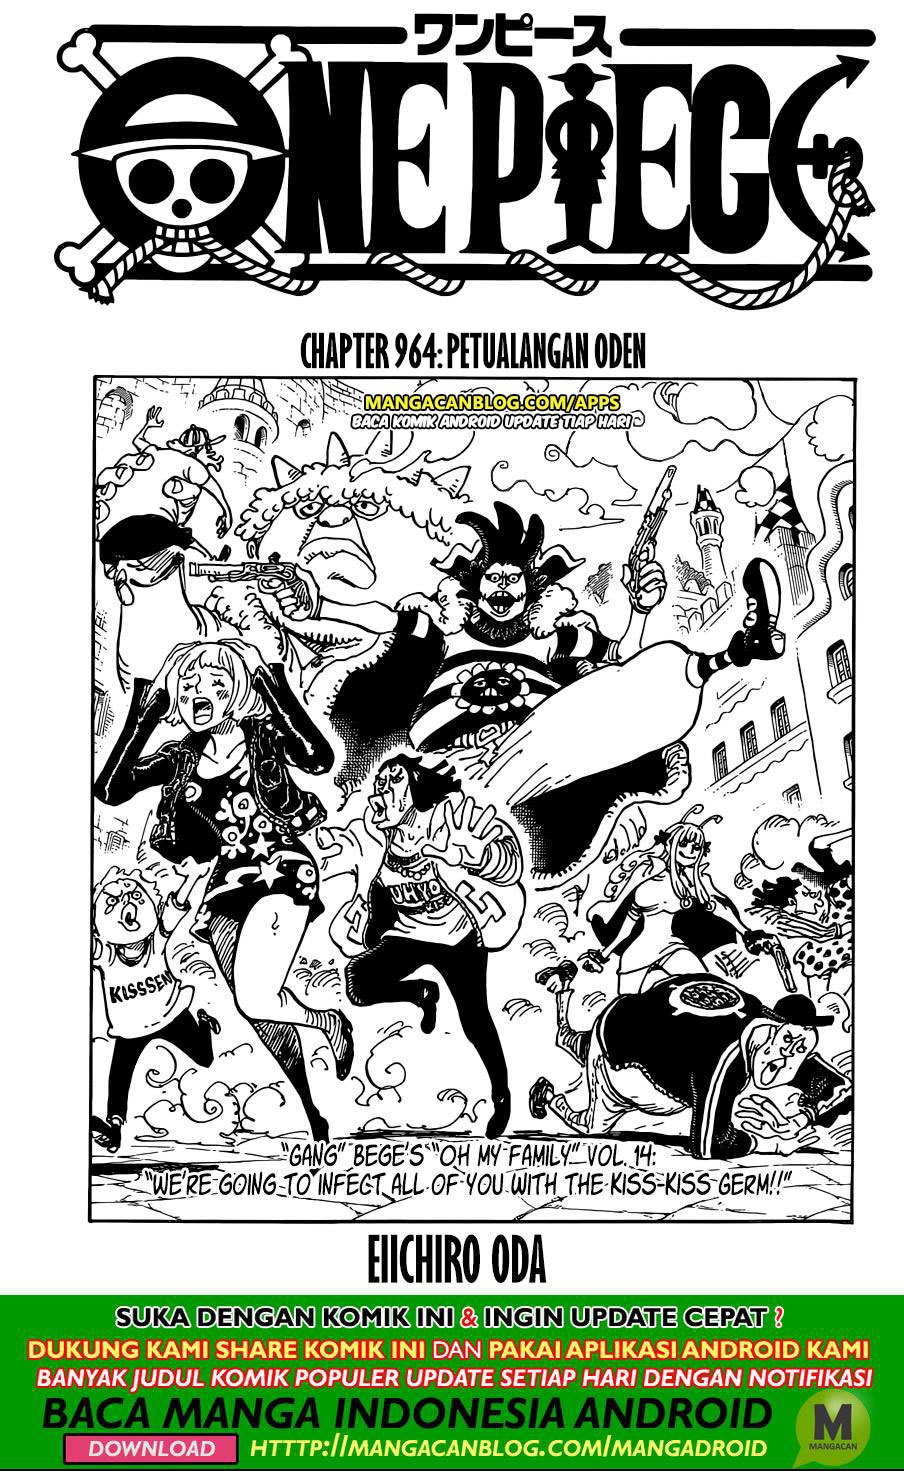 One Piece: Chapter 964 - Page 1